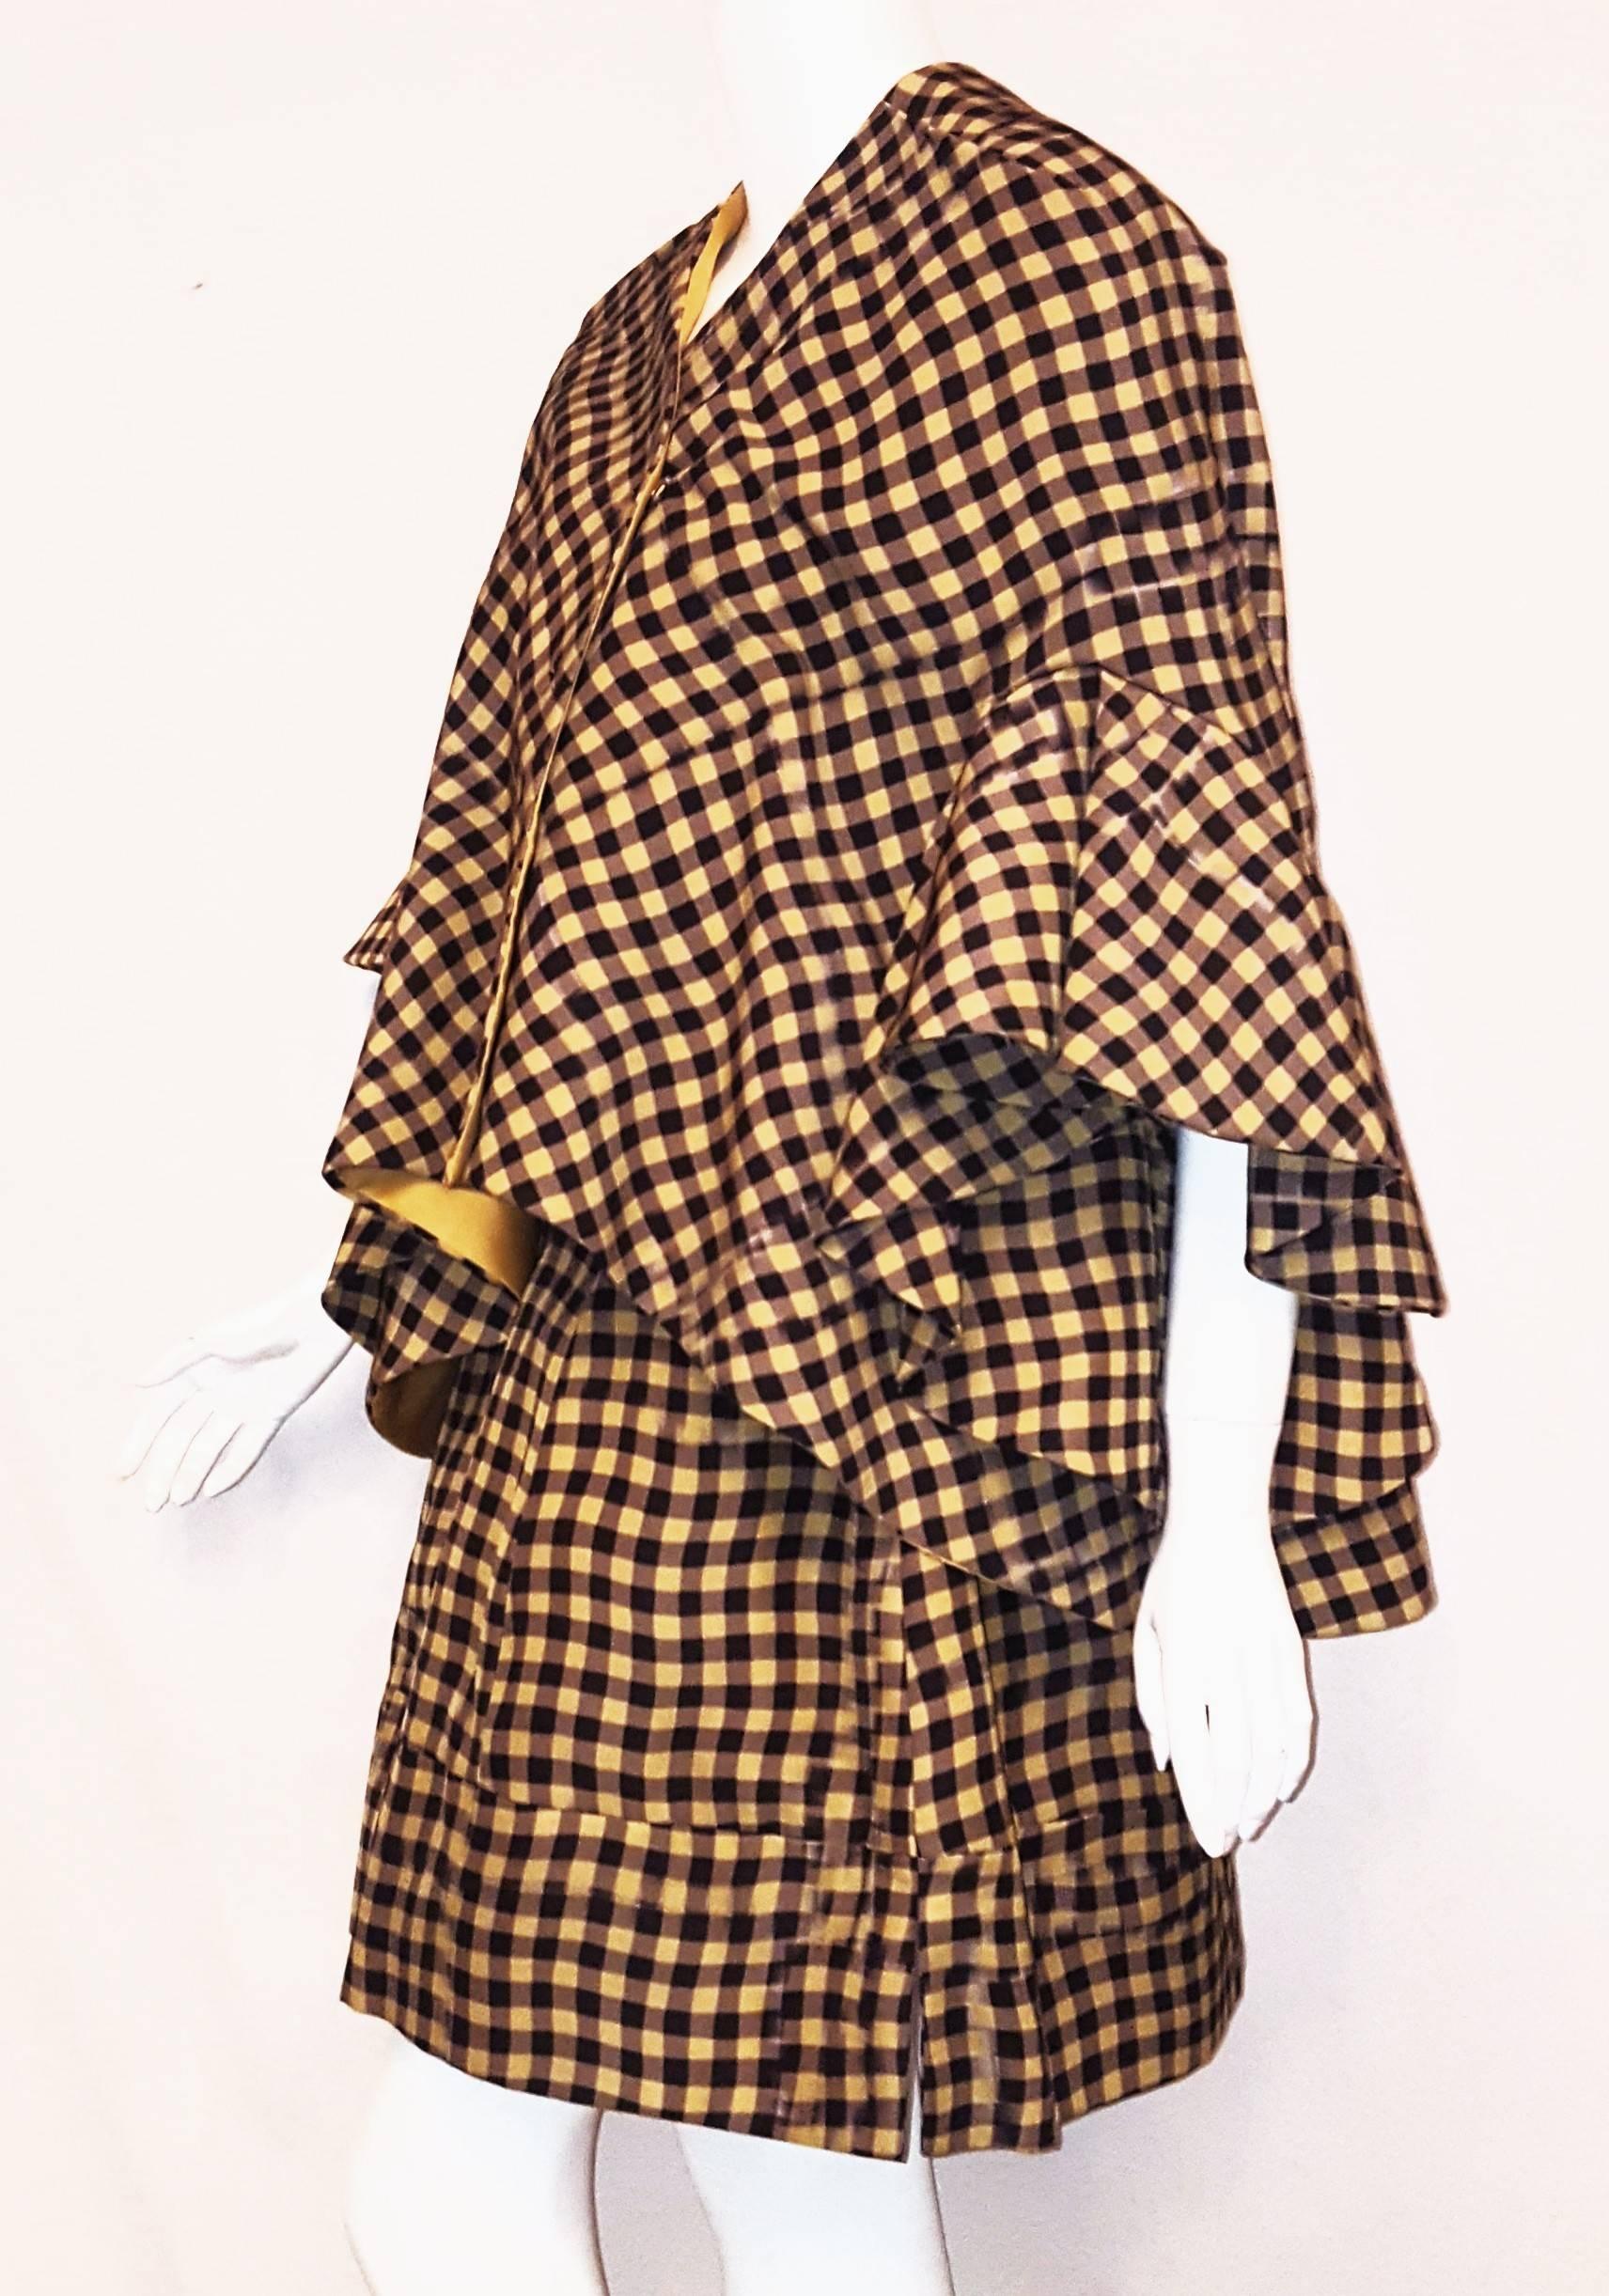 Delpozo brown and yellow check print jacket has exaggerated bell sleeves that are the focus of this ensemble.  This V neck double breasted jacket has 4 hidden snaps for closure.  The front of the jacket is 6 inches shorter than the rounded back. 